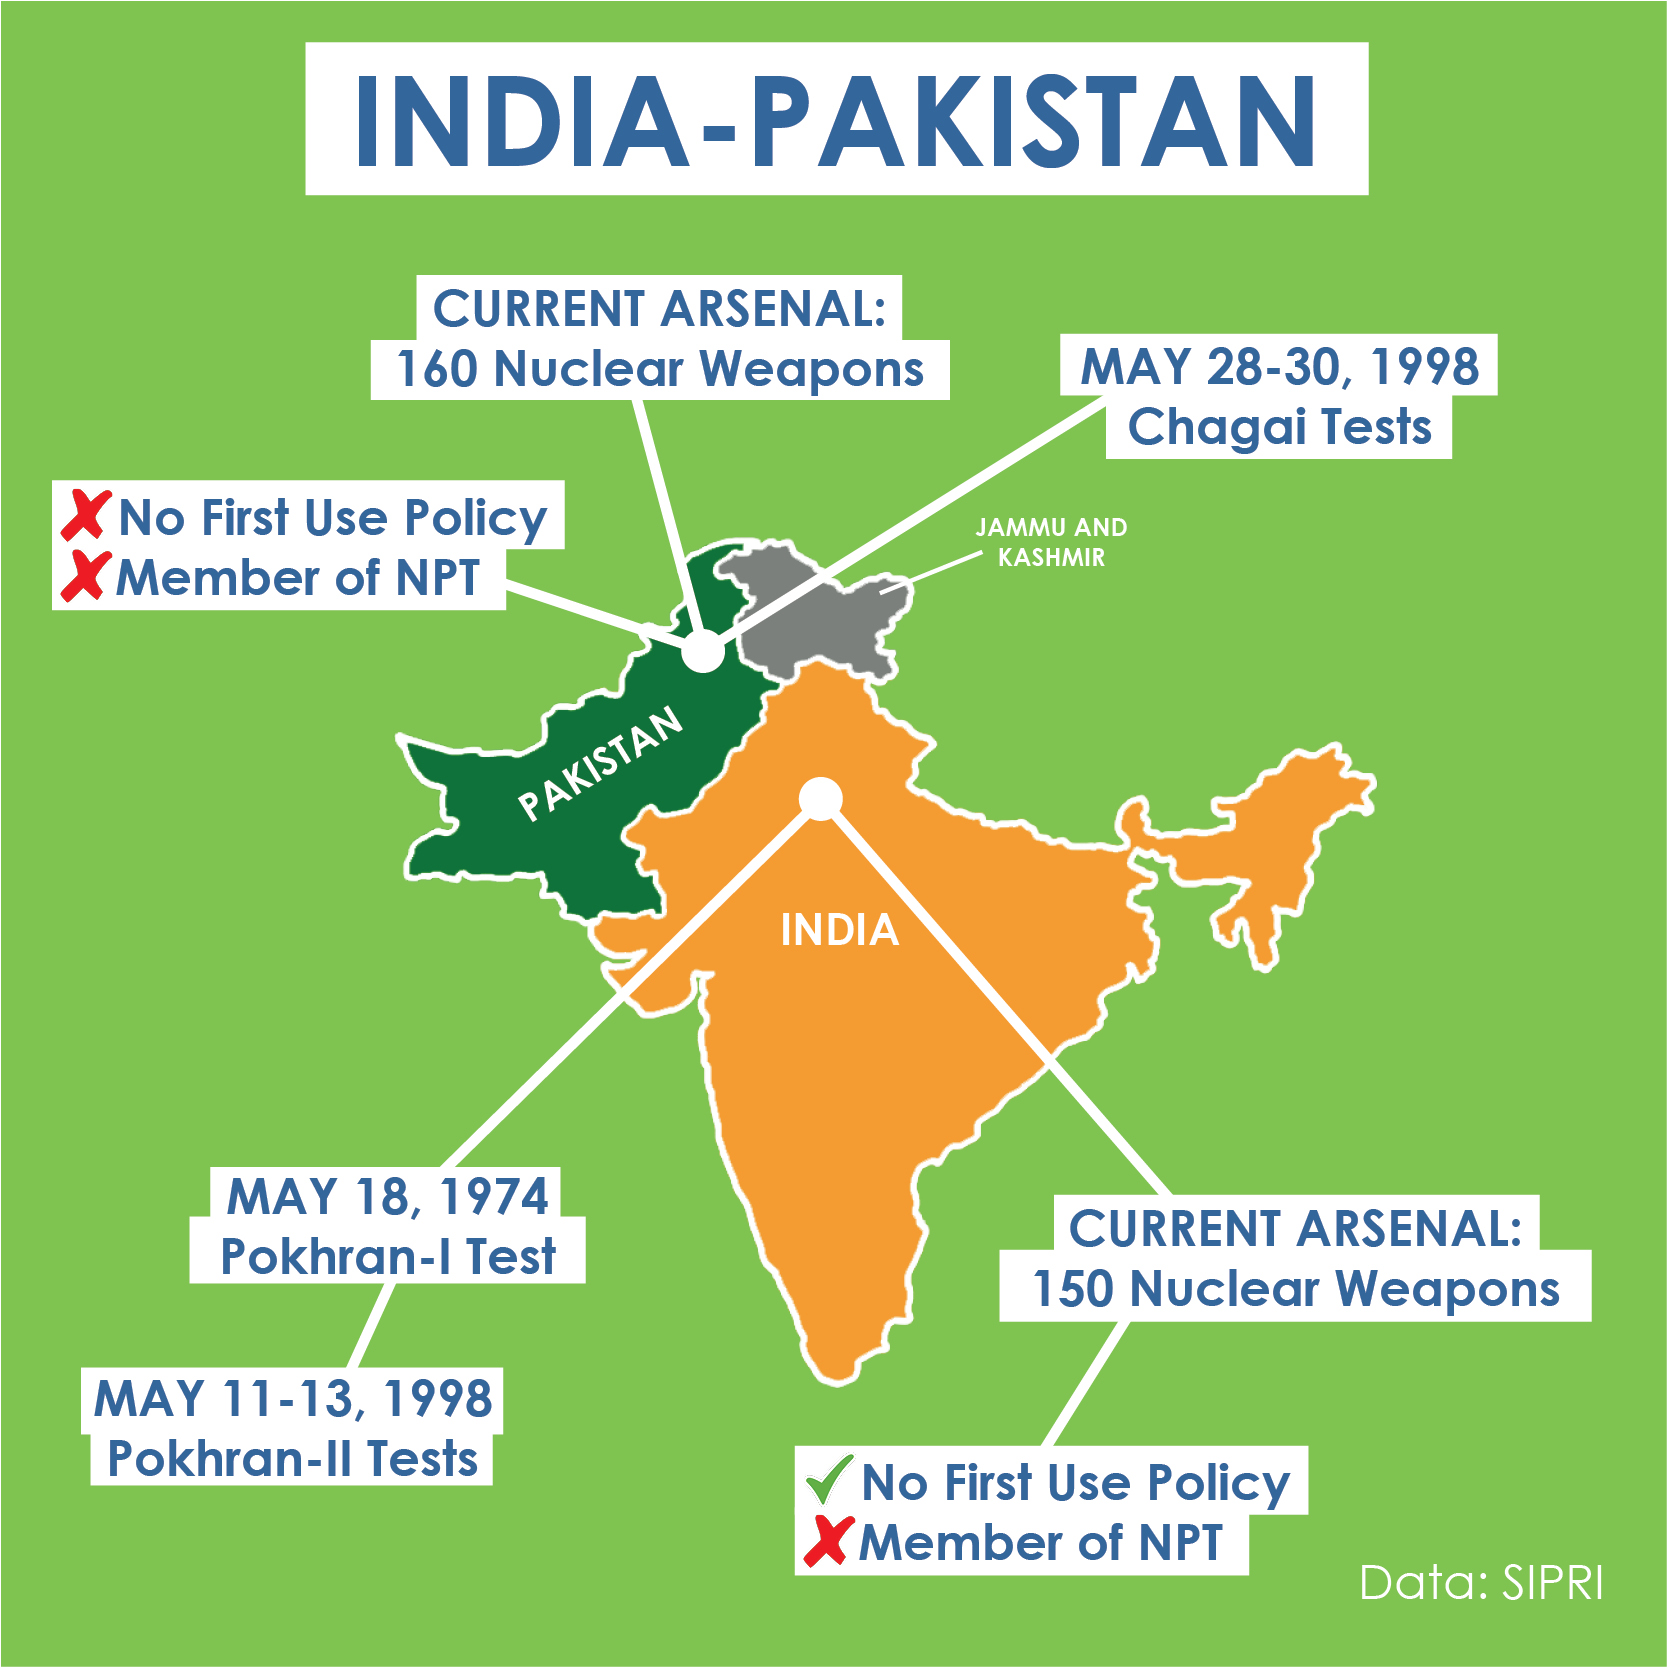 India and Pakistan Center for Arms Control and NonProliferation